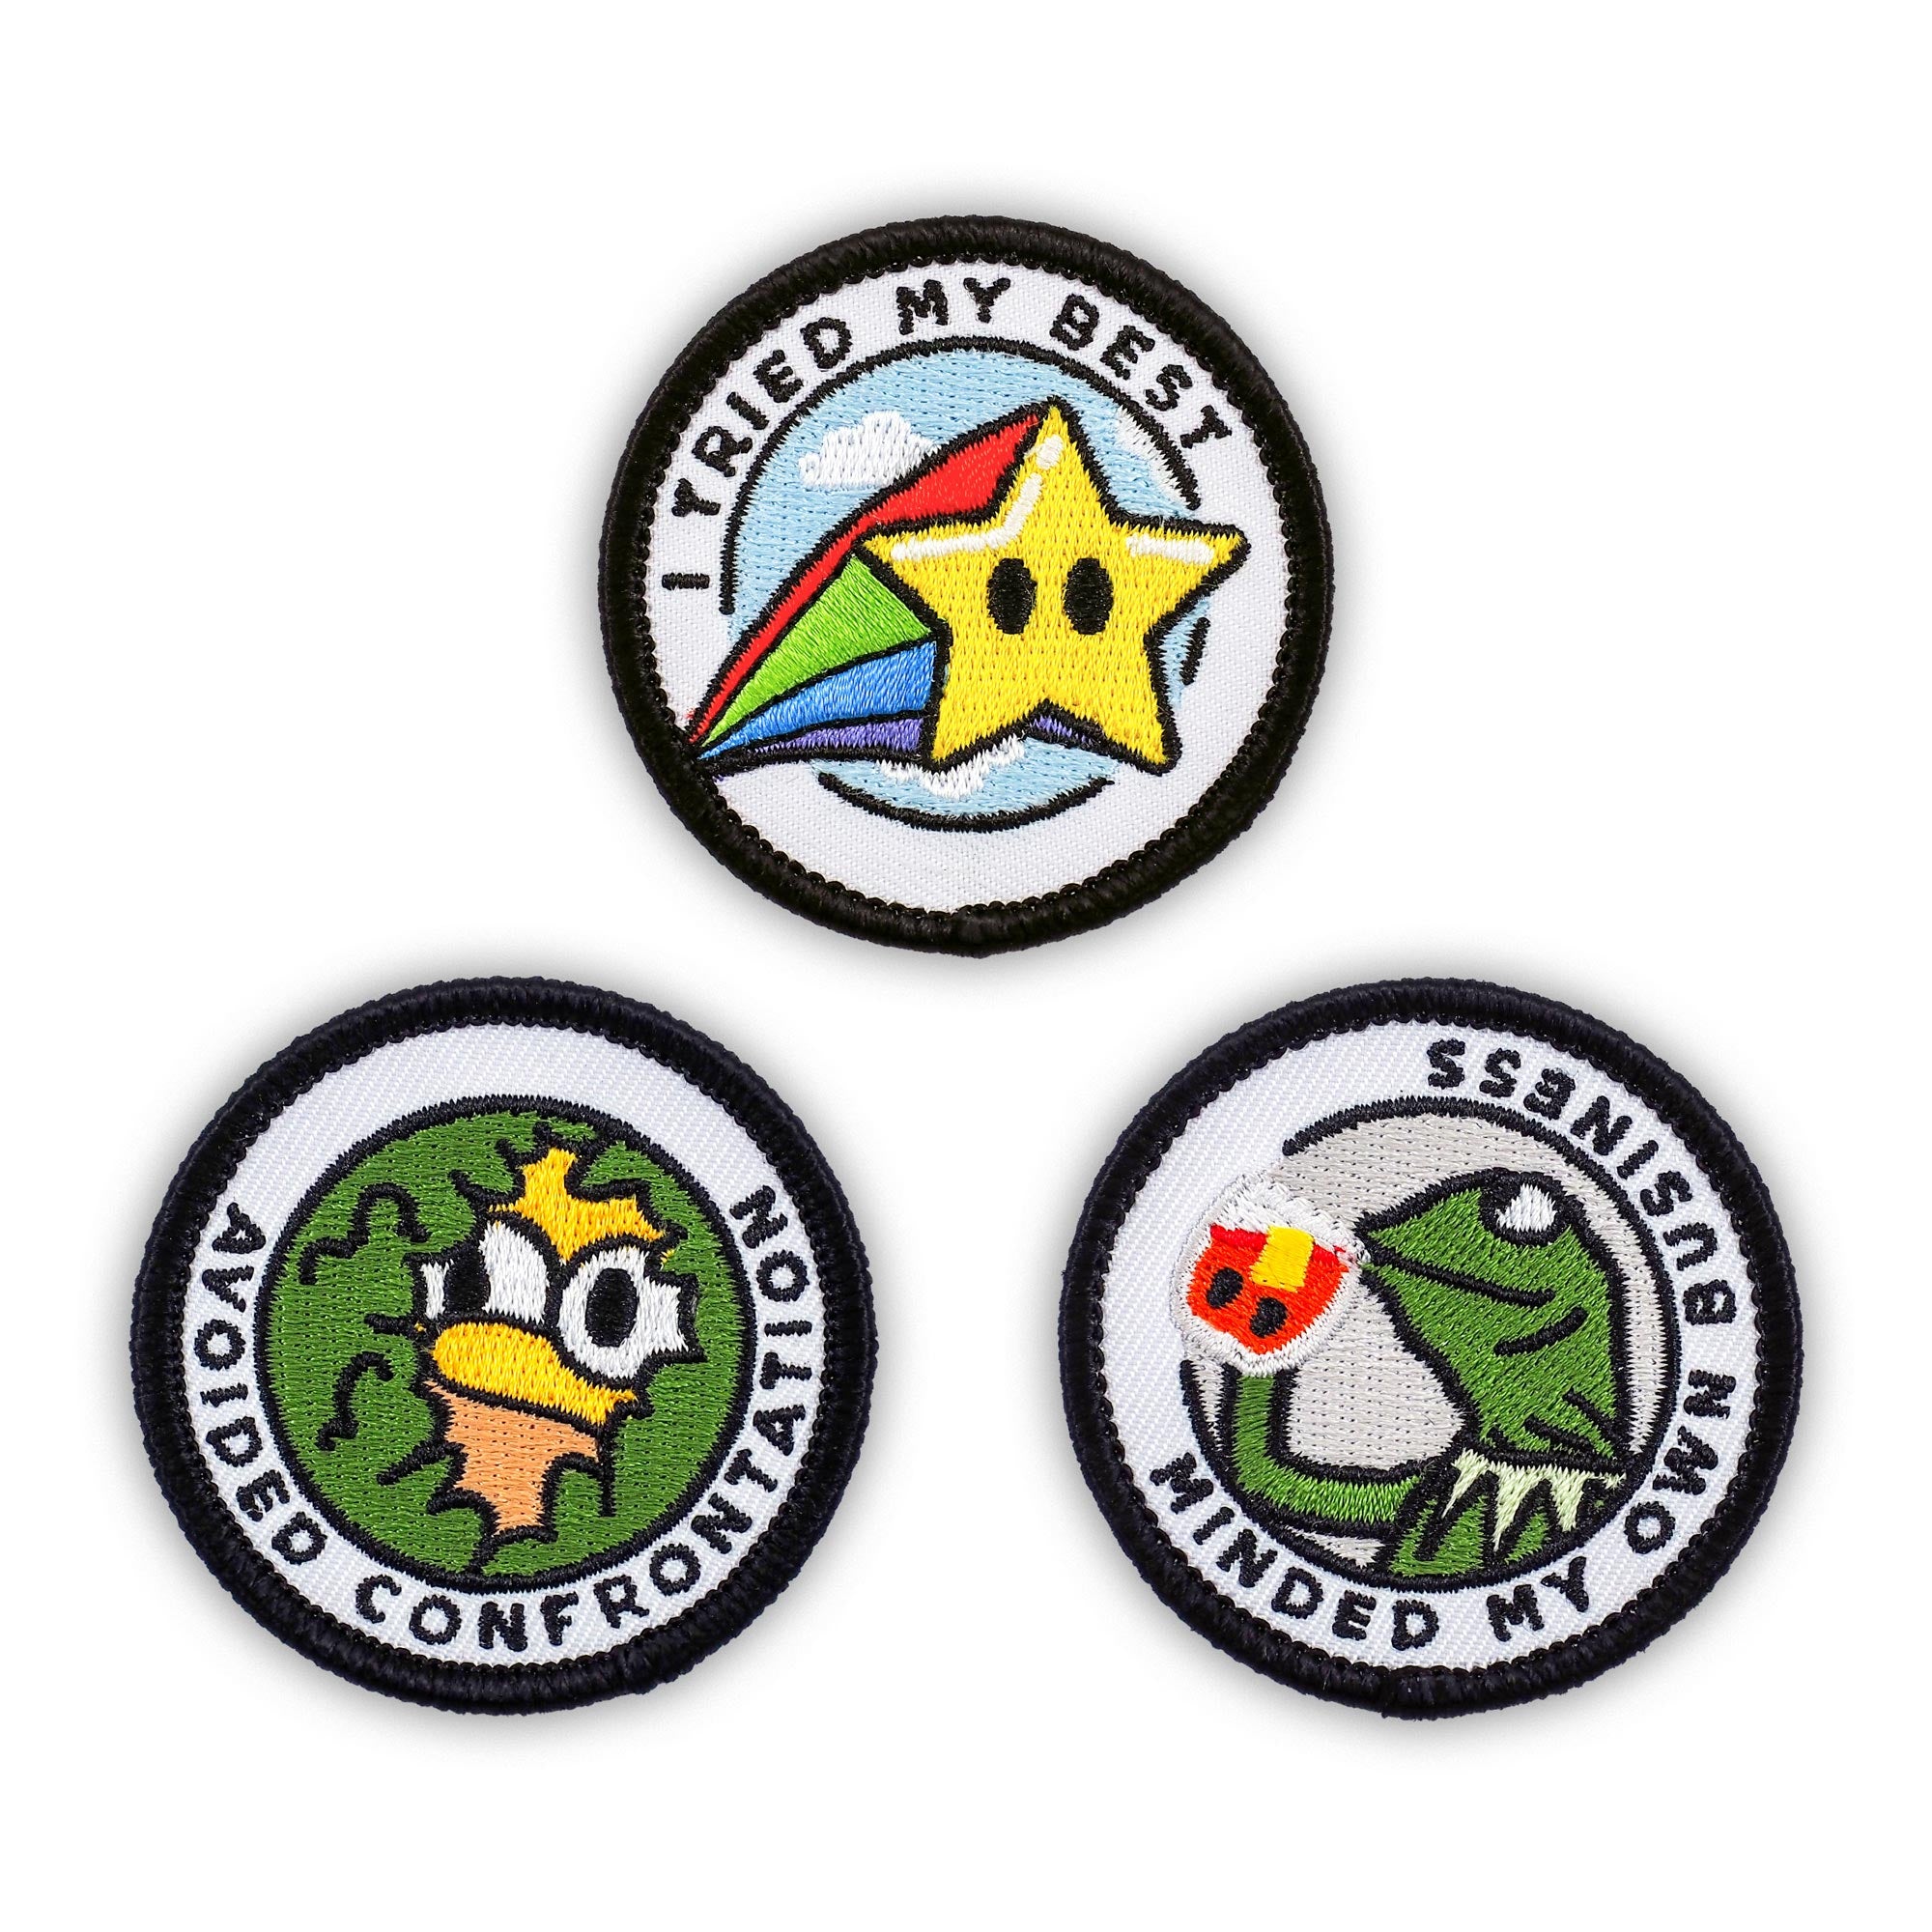 Winks for Days Adulting Merit Badge Embroidered Iron-On Patches (Funny - Set 1) - Includes Three (3) 2” Patches: Avoided Confrontation, I Tried My